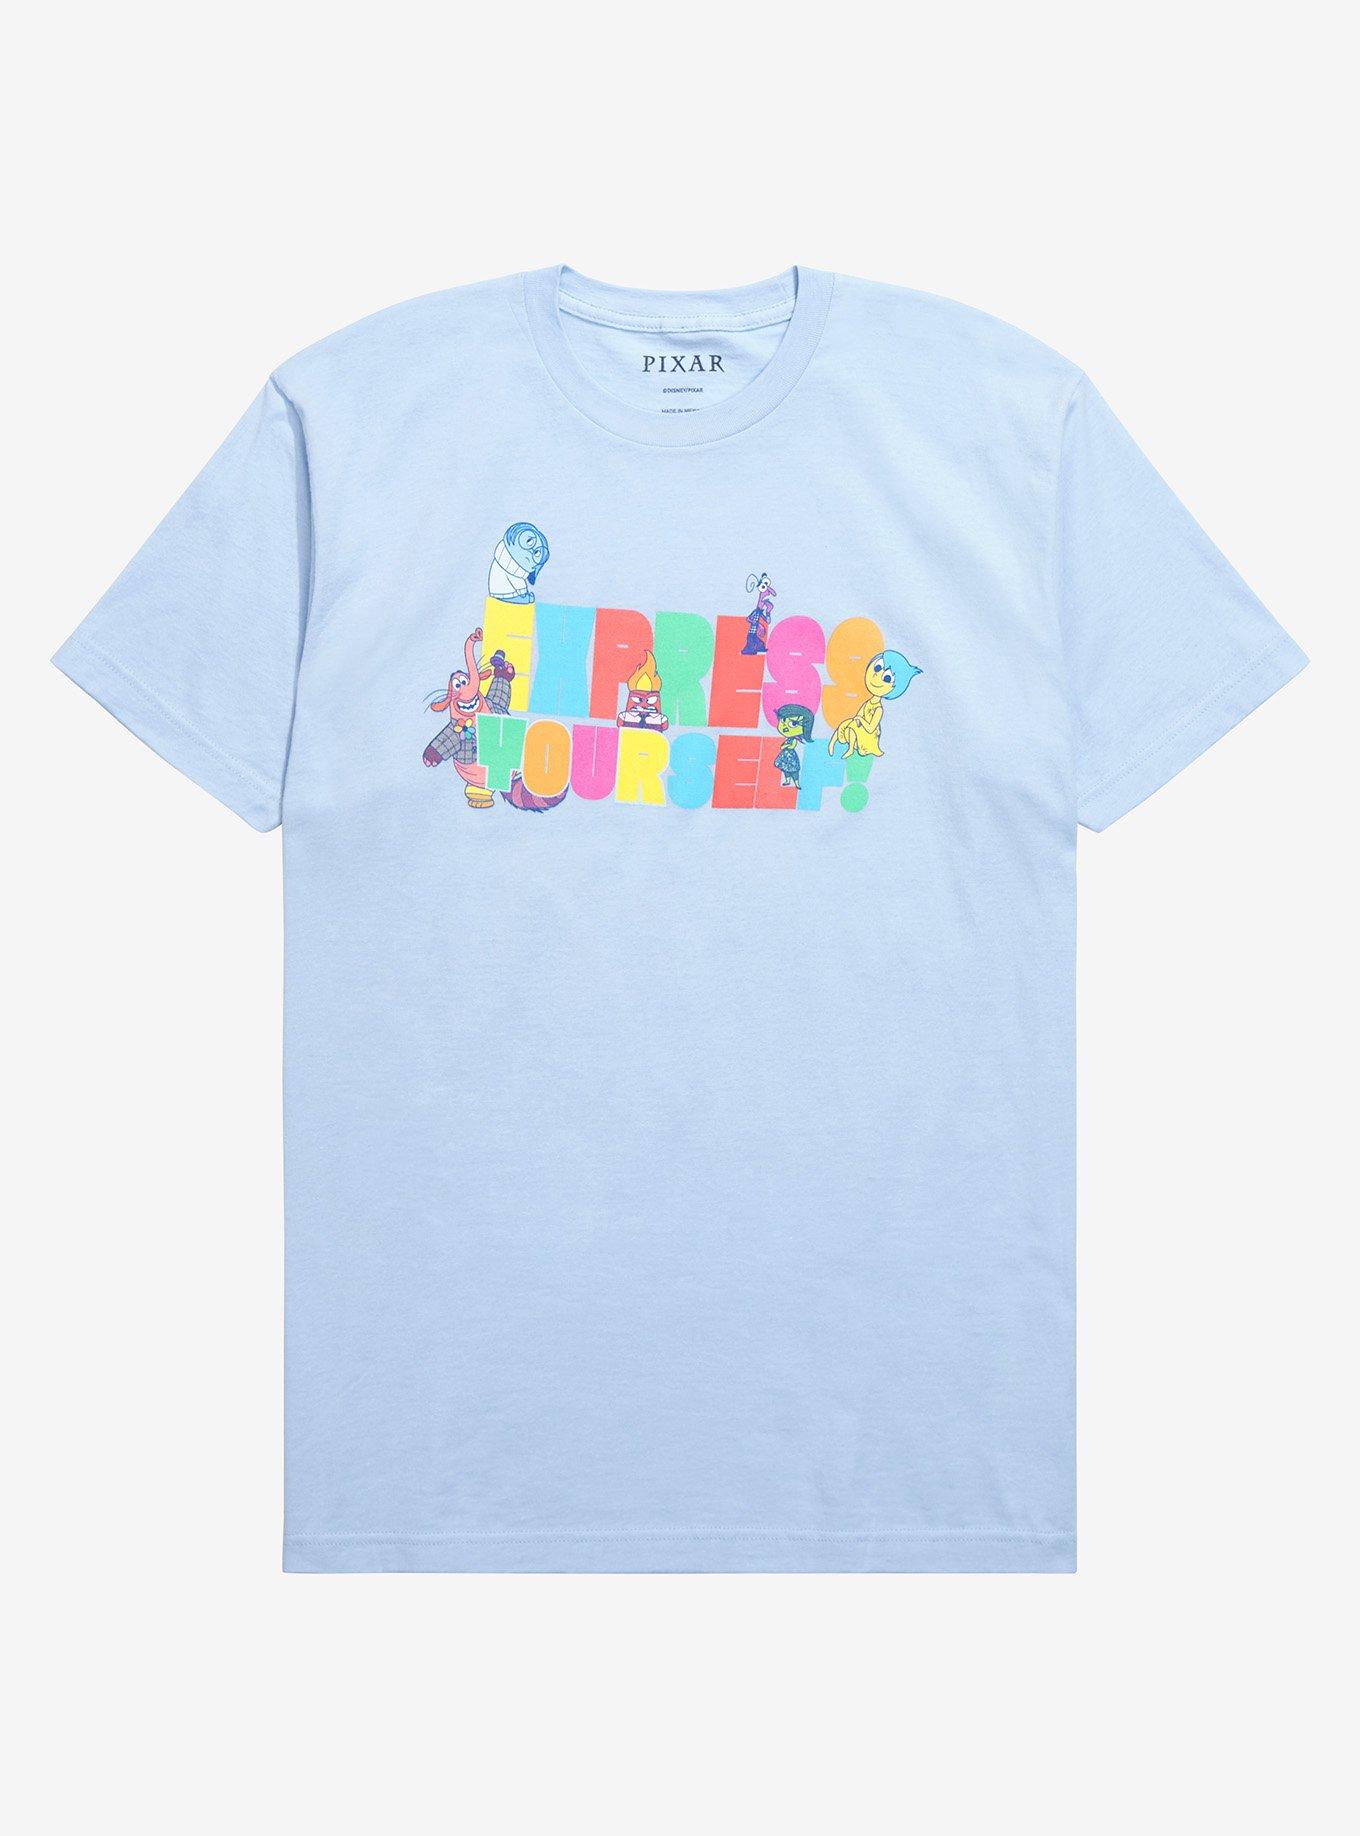 Disney Pixar Inside Out Joy Blue And White Striped Graphic T Shirt